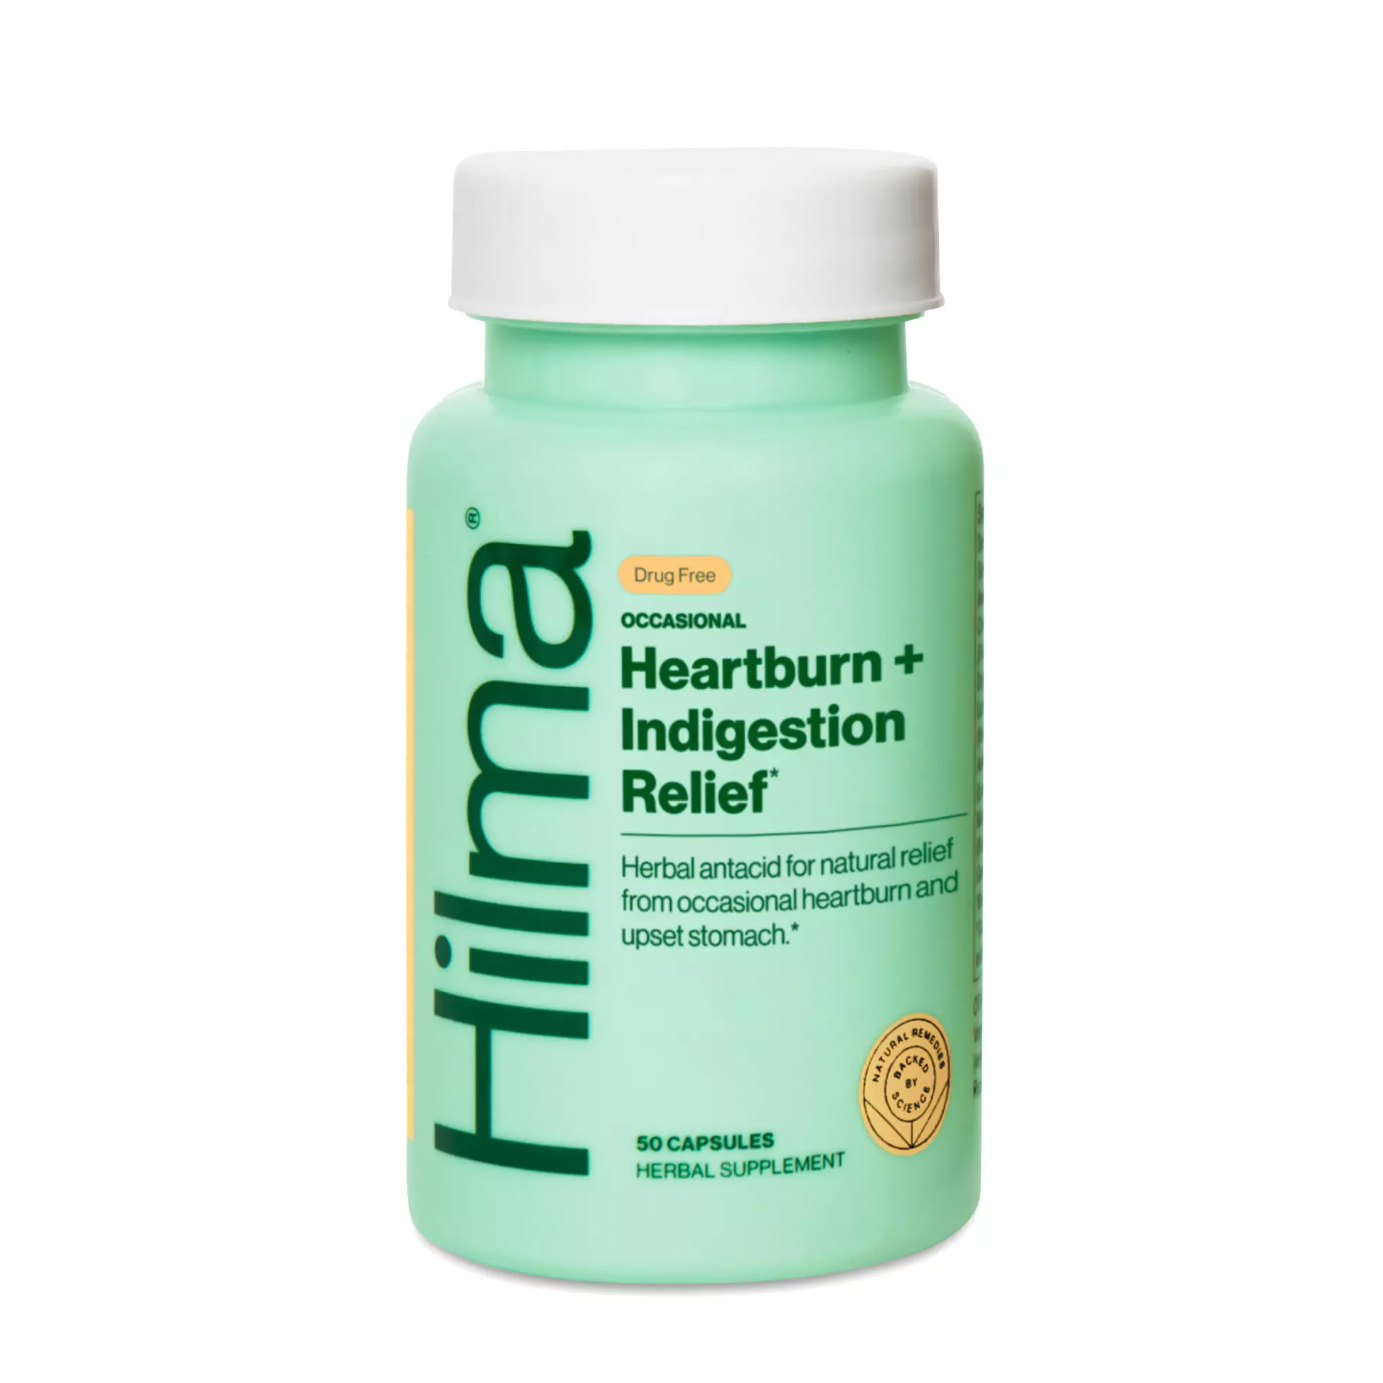 Hilma Occasional Heartburn + Indigestion Relief